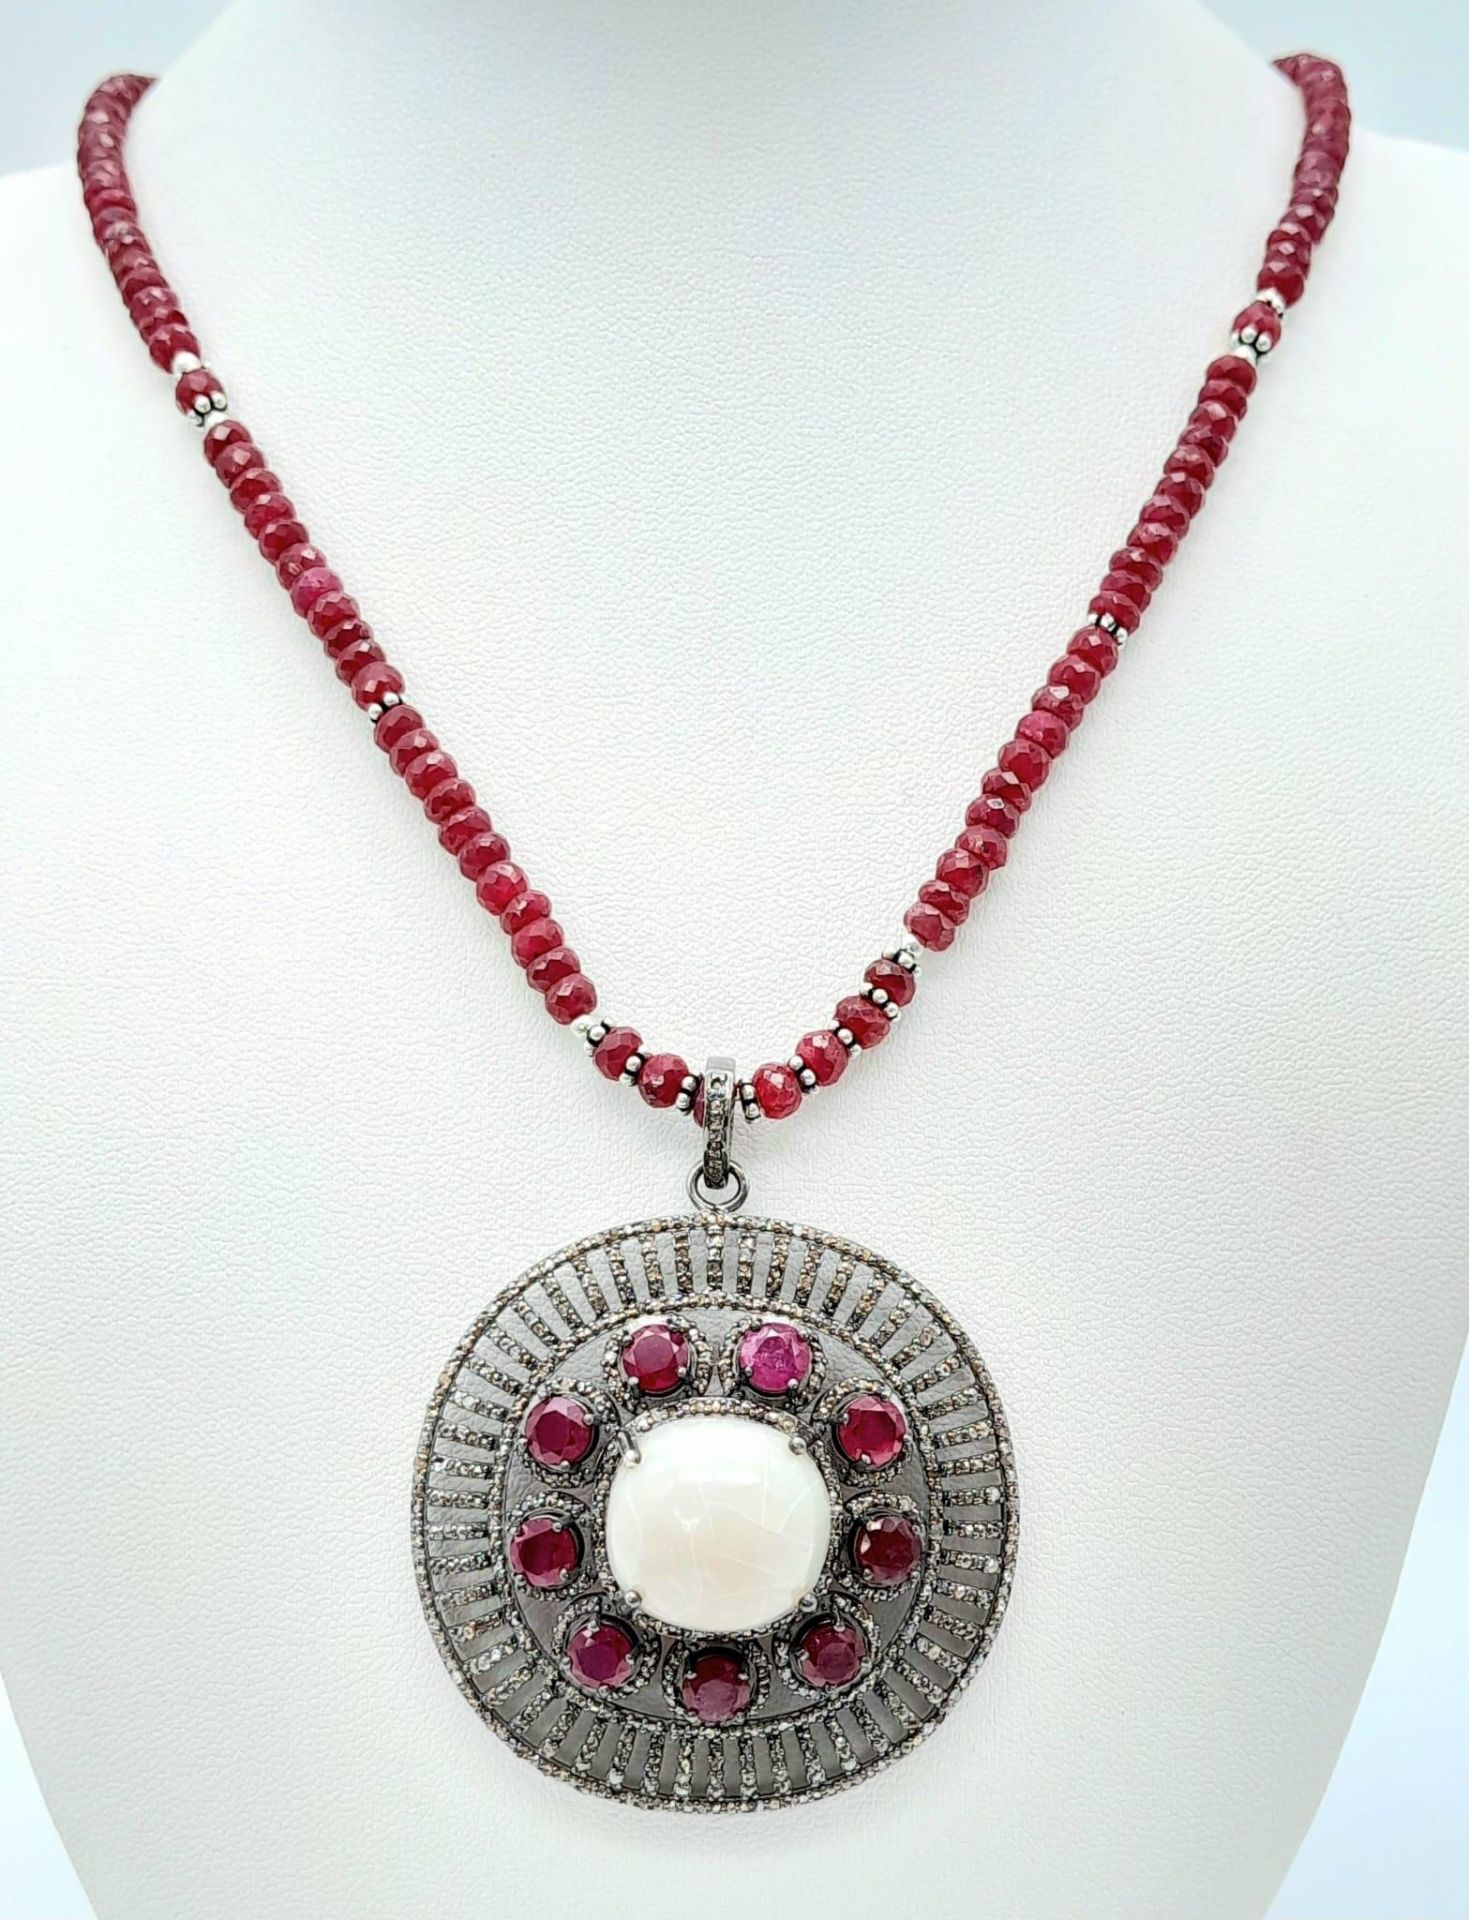 An Opal Pendant with Ruby and Diamond Surround on a Detachable Ruby Necklace. 16.5ct opal, 7.5ctw